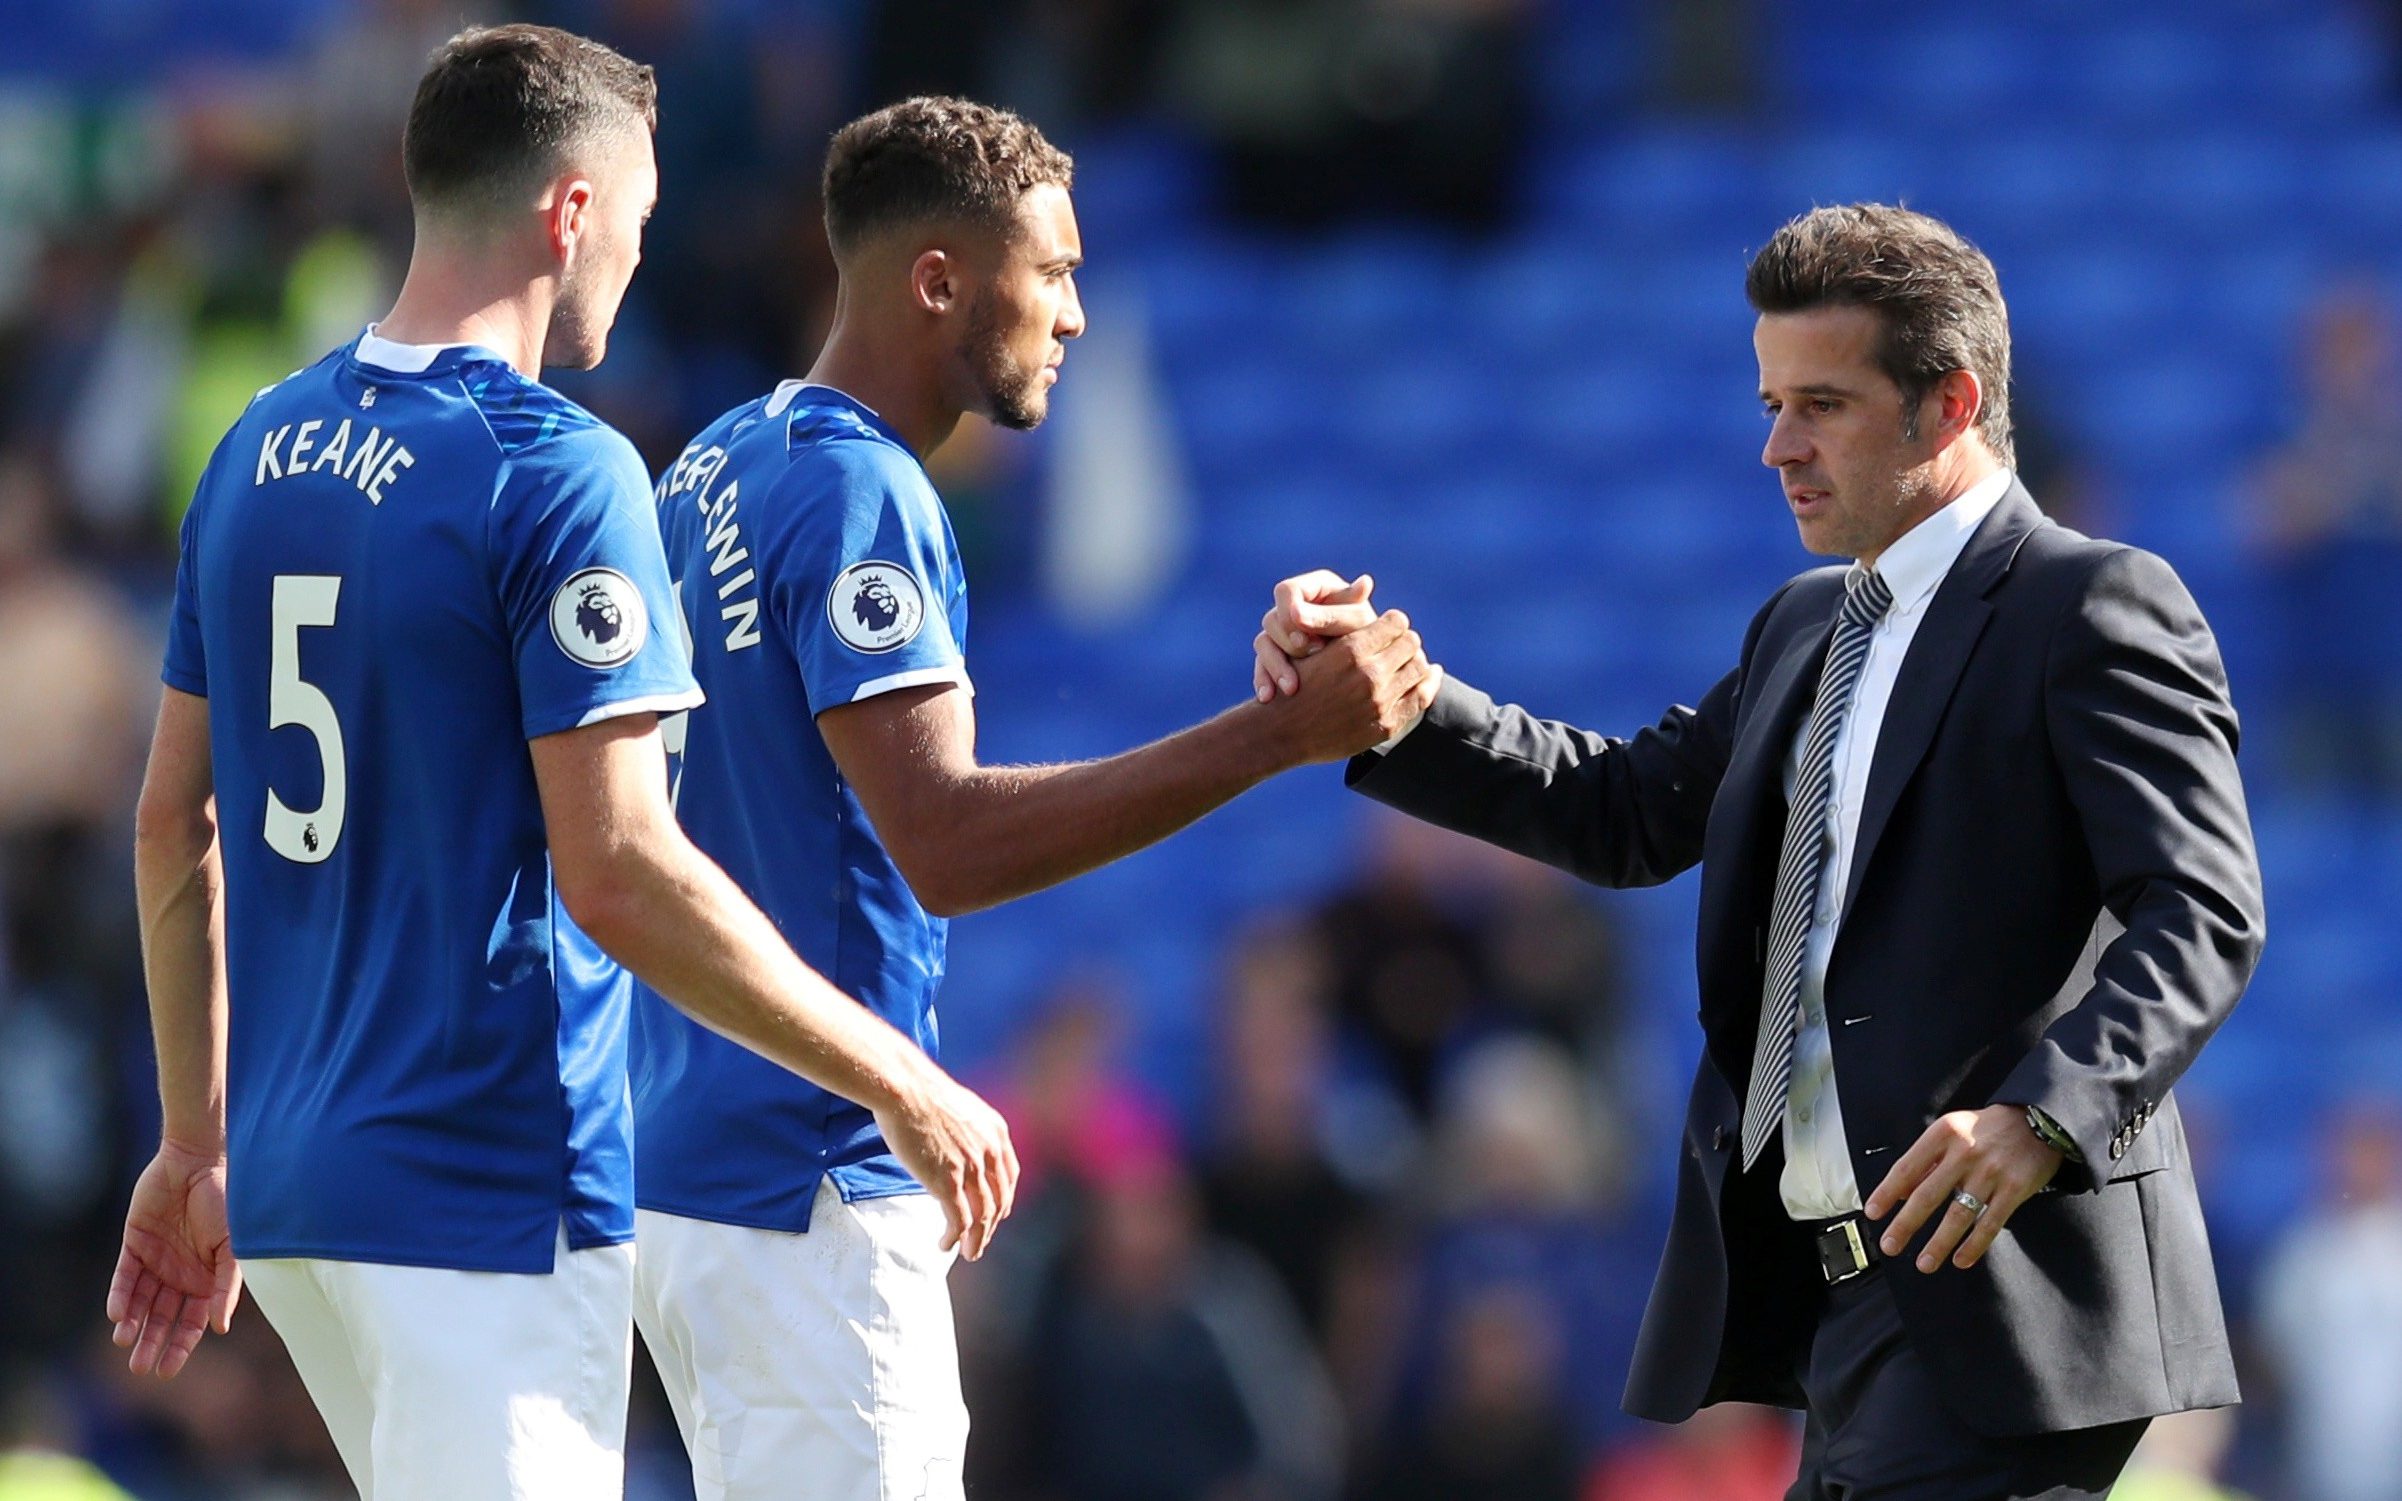 Silva is benefiting from the most effective weapon at Everton’s disposal - their legendary home